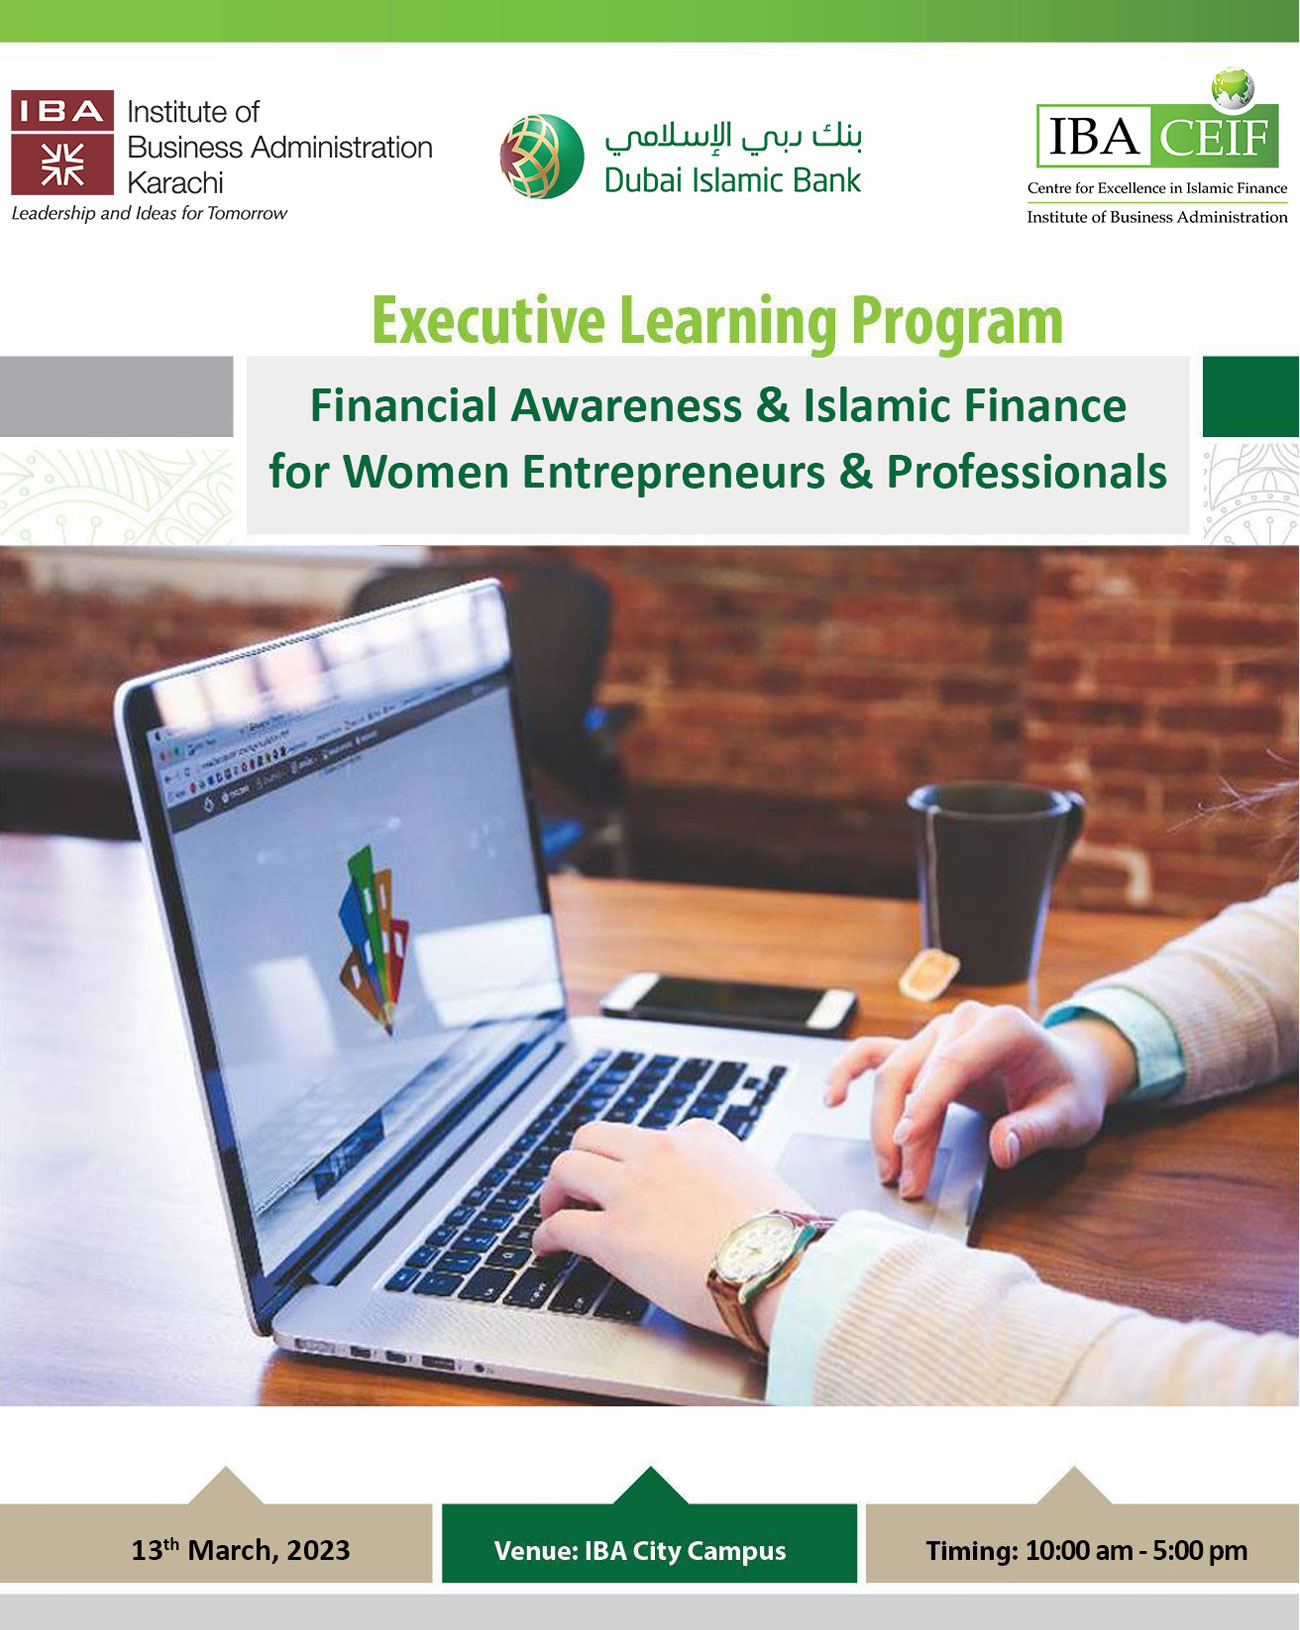 Financial Awareness & Islamic Finance for Women Entrepreneurs and Professionals